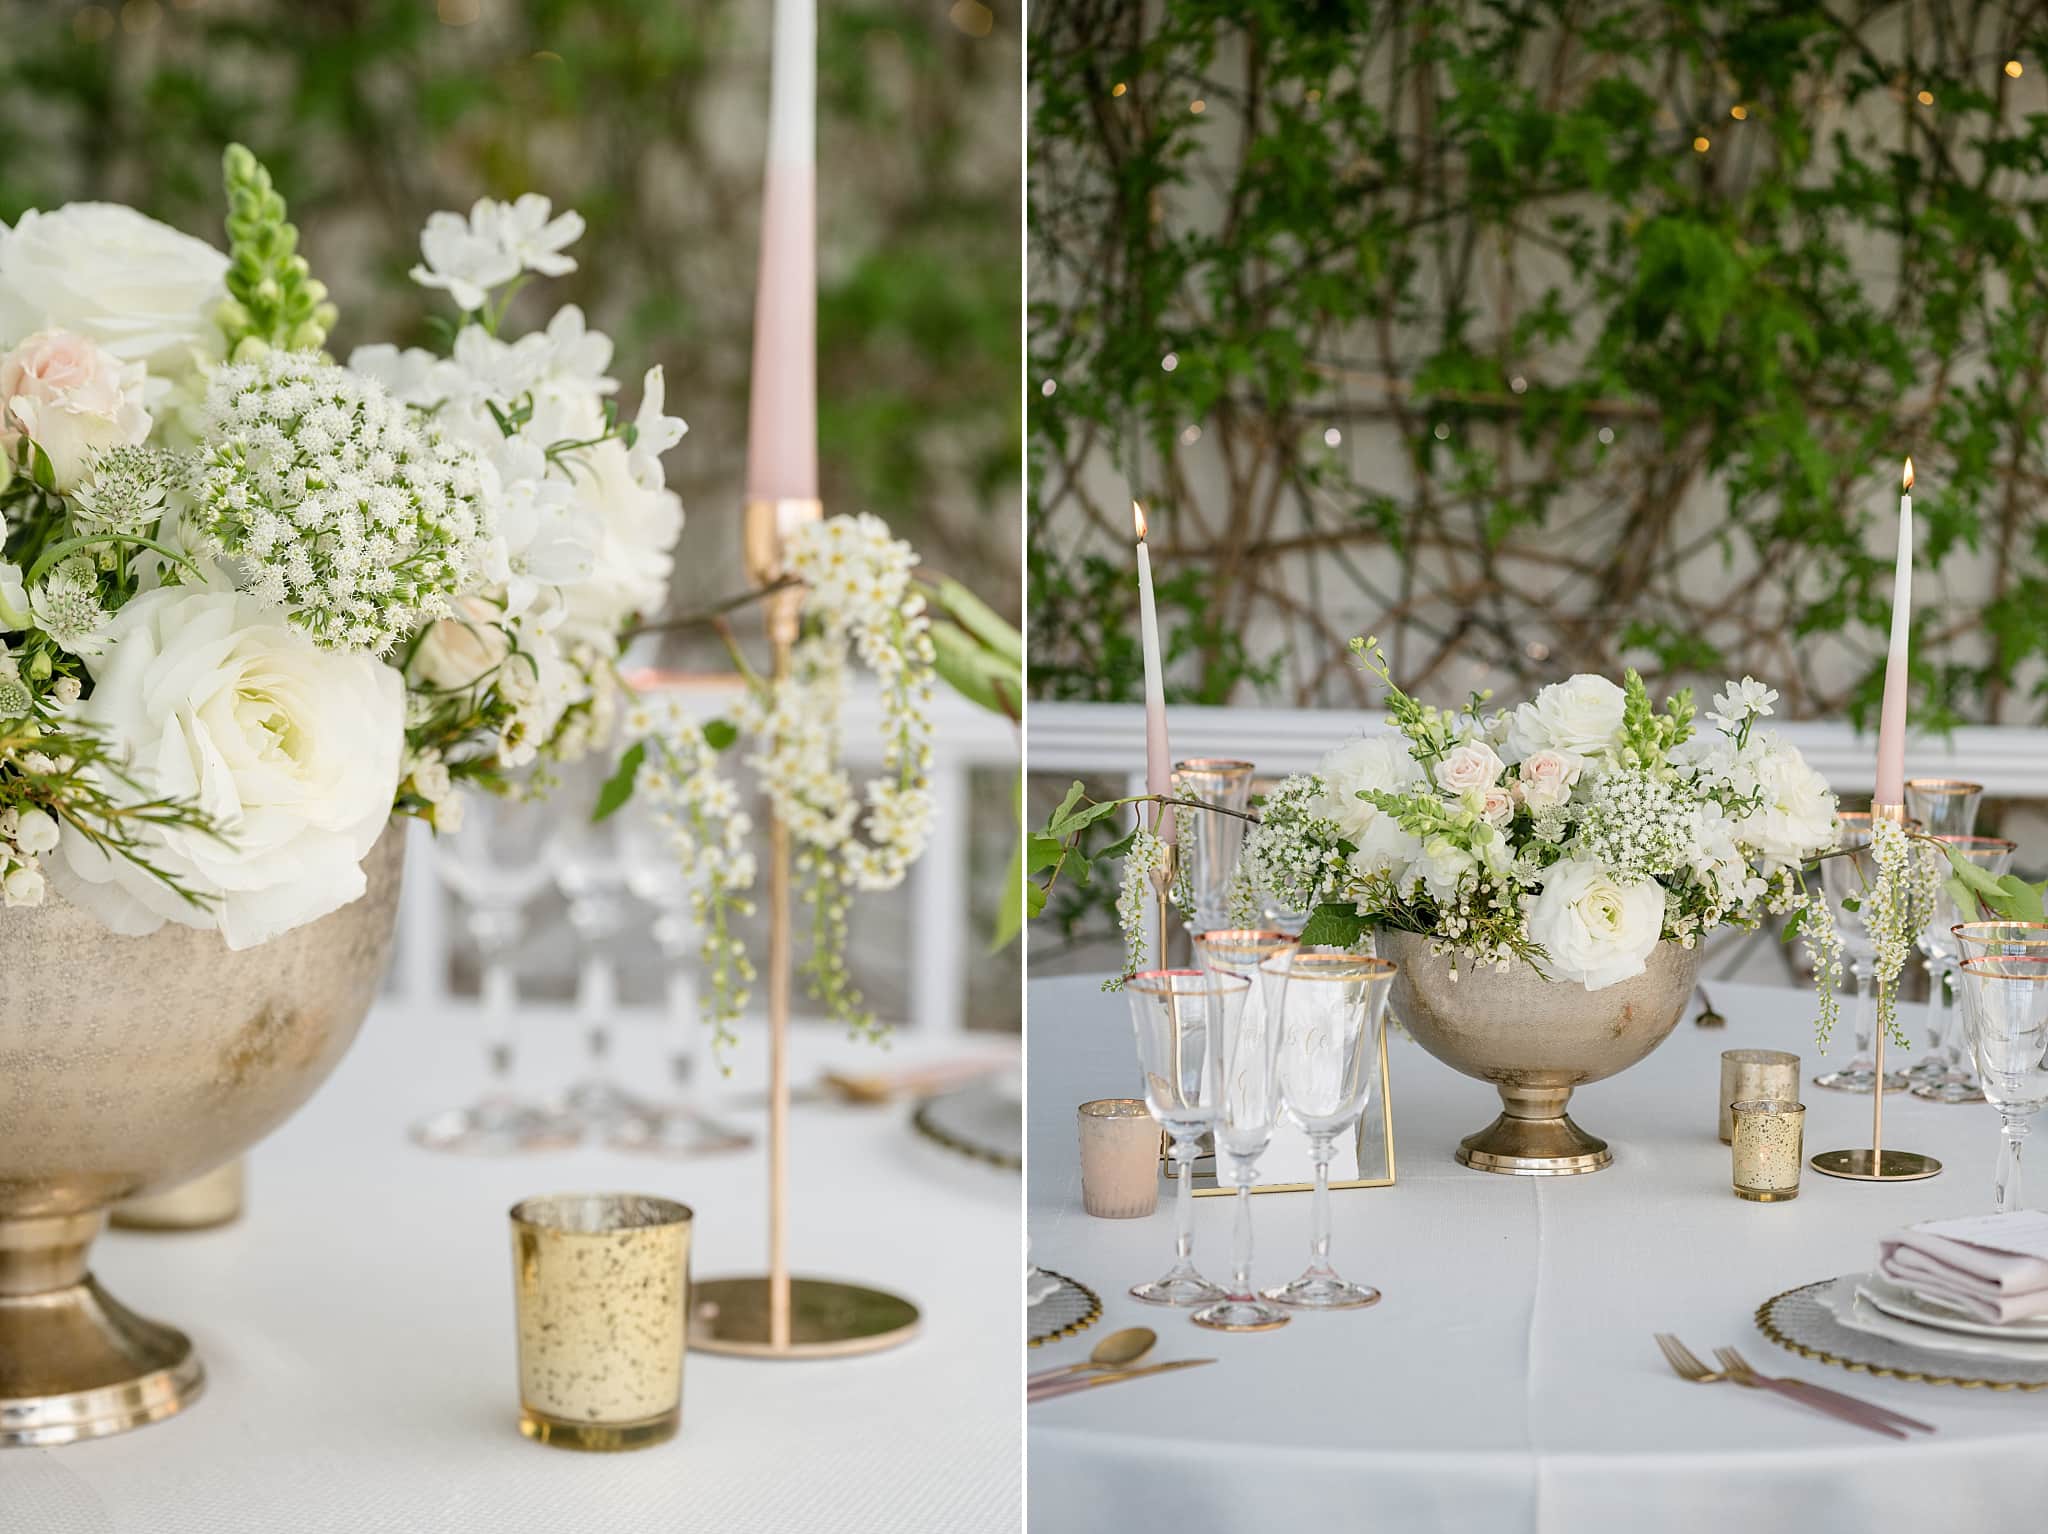 Green and white flowers in a gold bowl with gold rimmed glasses and chargers